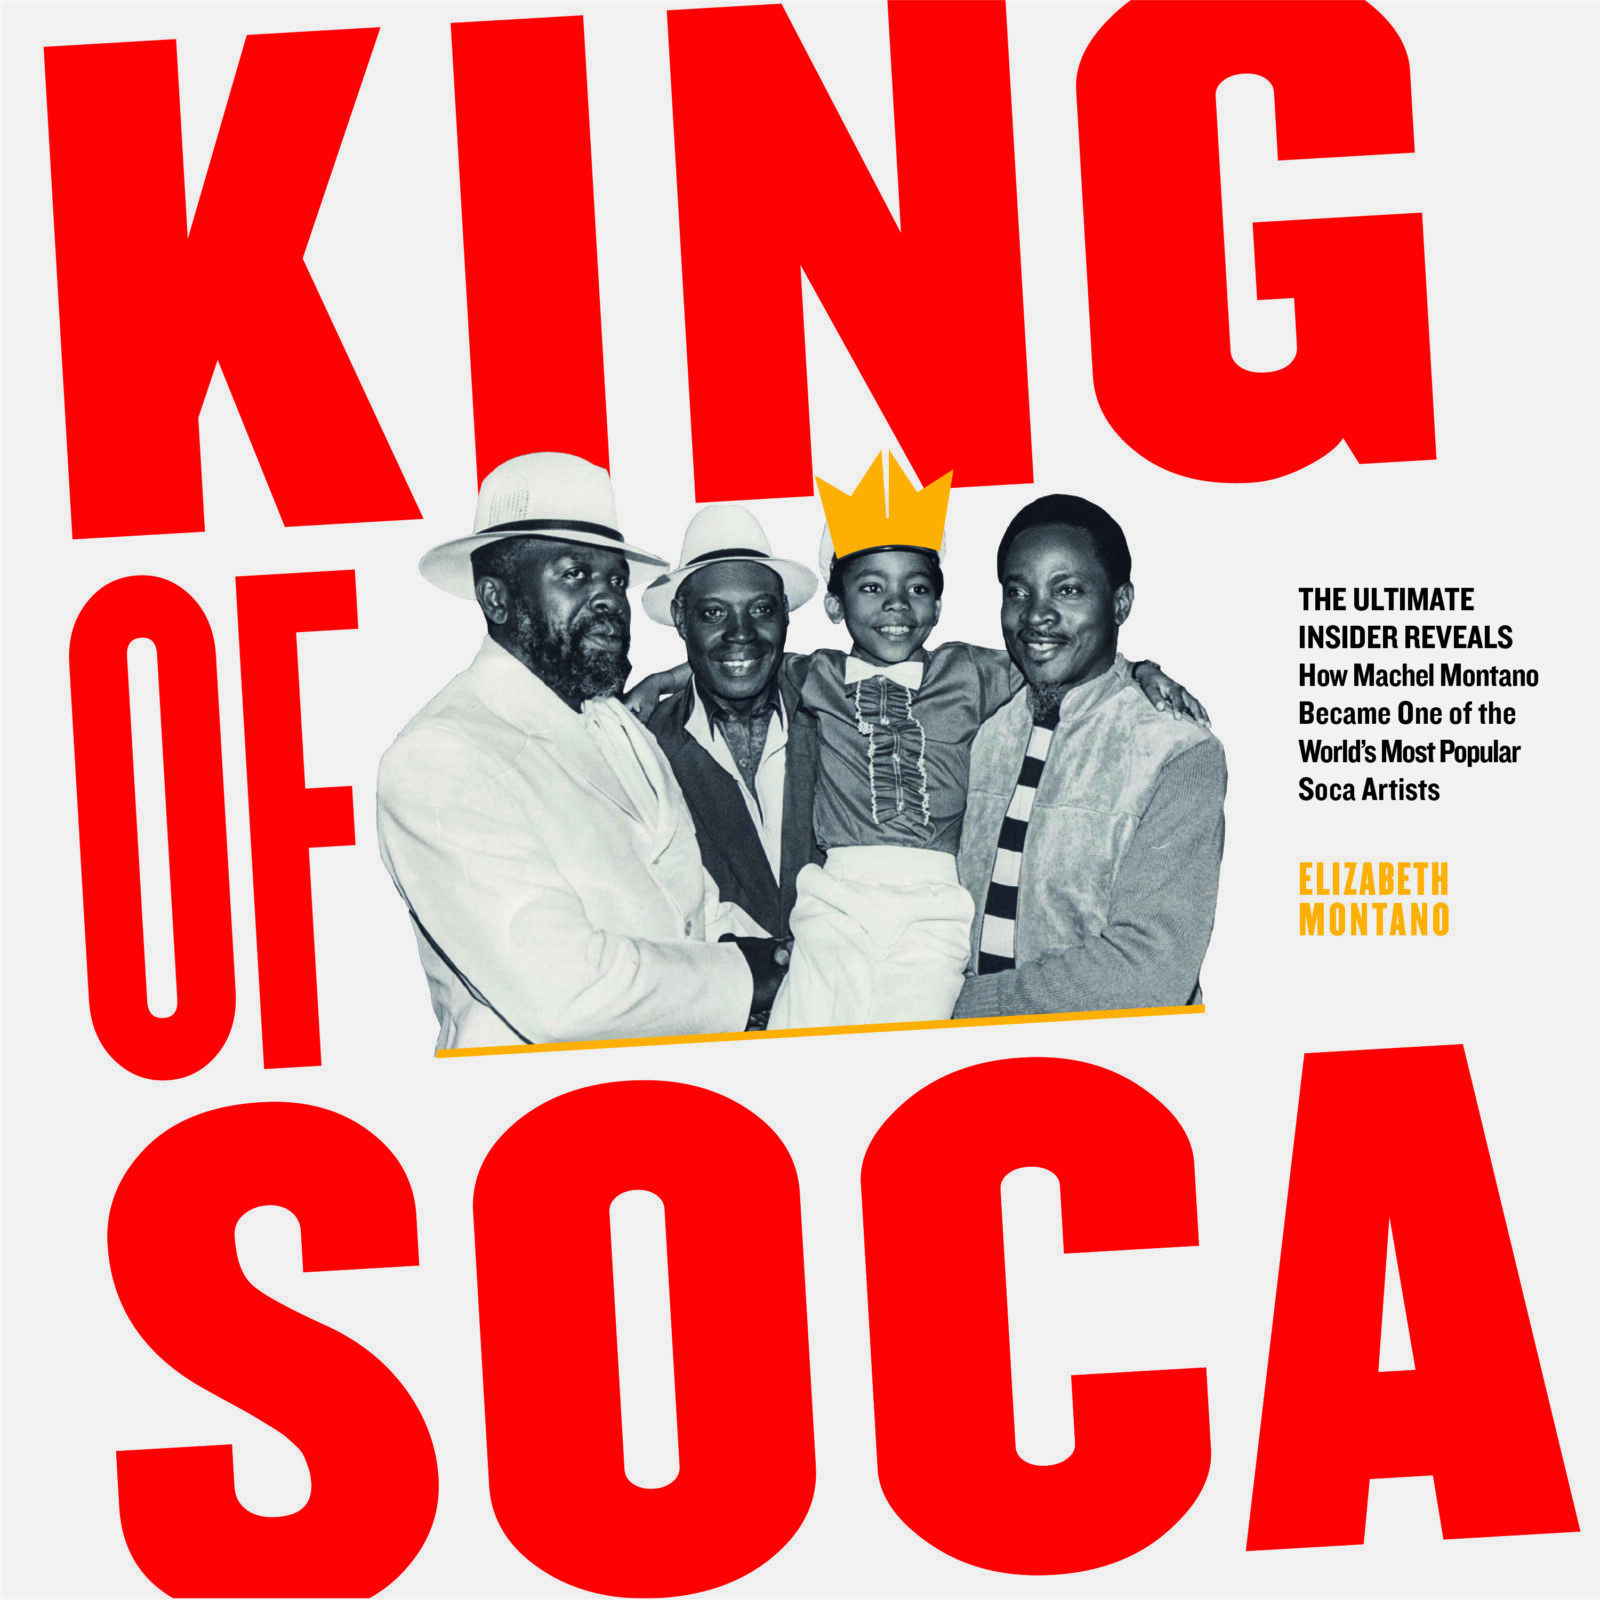 King-of-Soca-front-cover-Eliana-Cohen-Orth-1600x1600